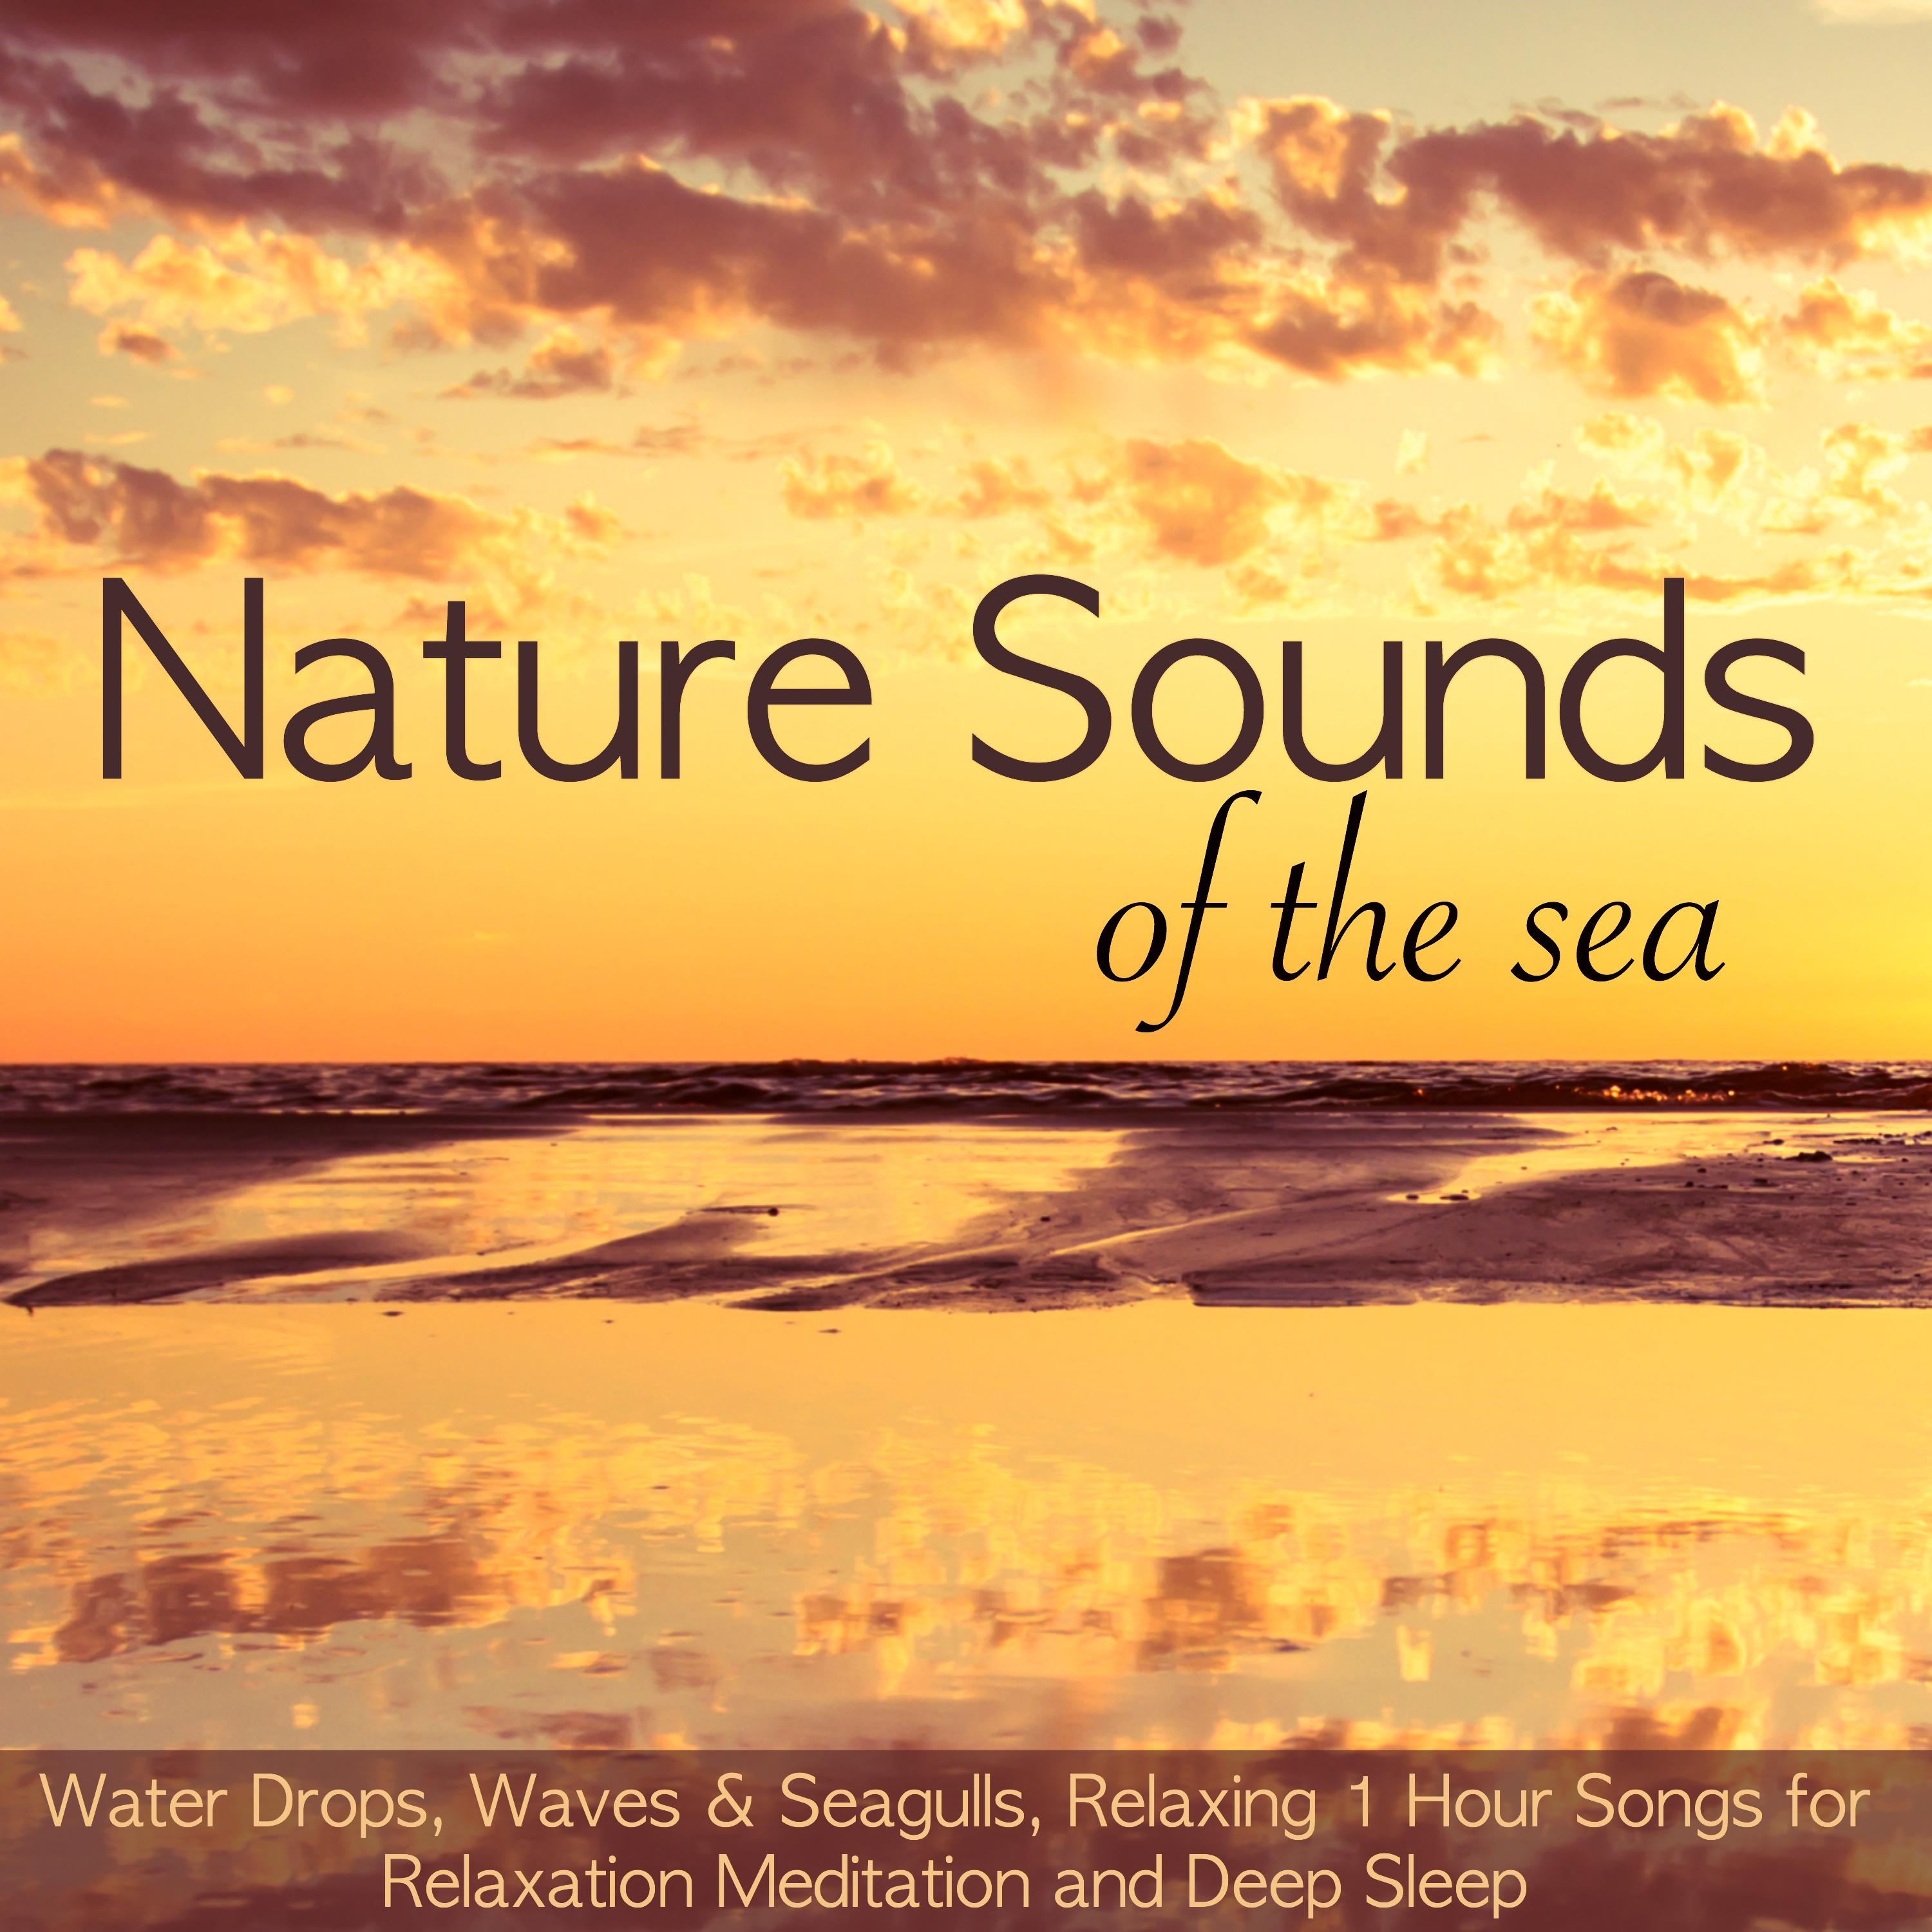 Nature Sounds of the Sea  Water Drops, Waves  Seagulls, Relaxing 1 Hour Songs for Relaxation Meditation and Deep Sleep